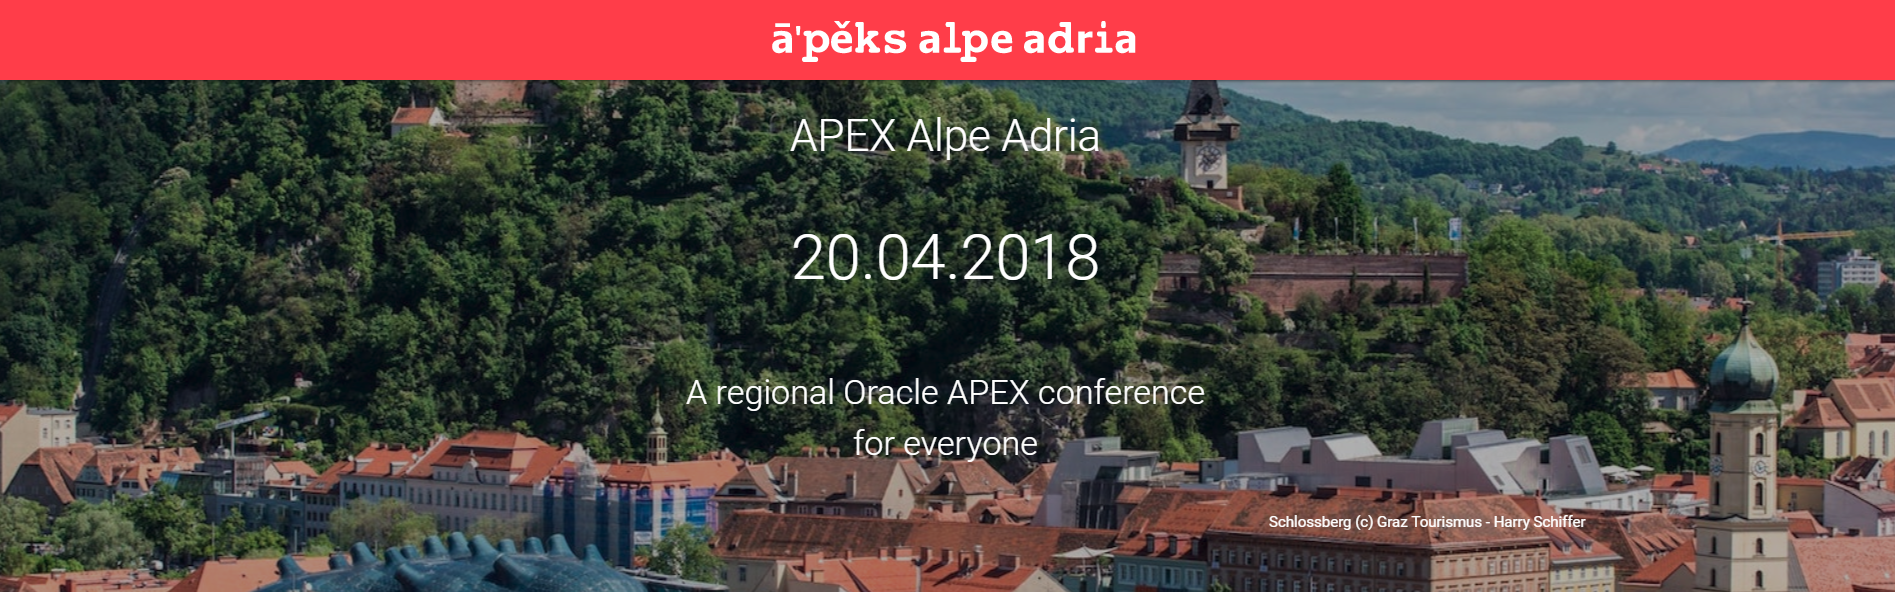 My expectations for #aaapeks18 conference